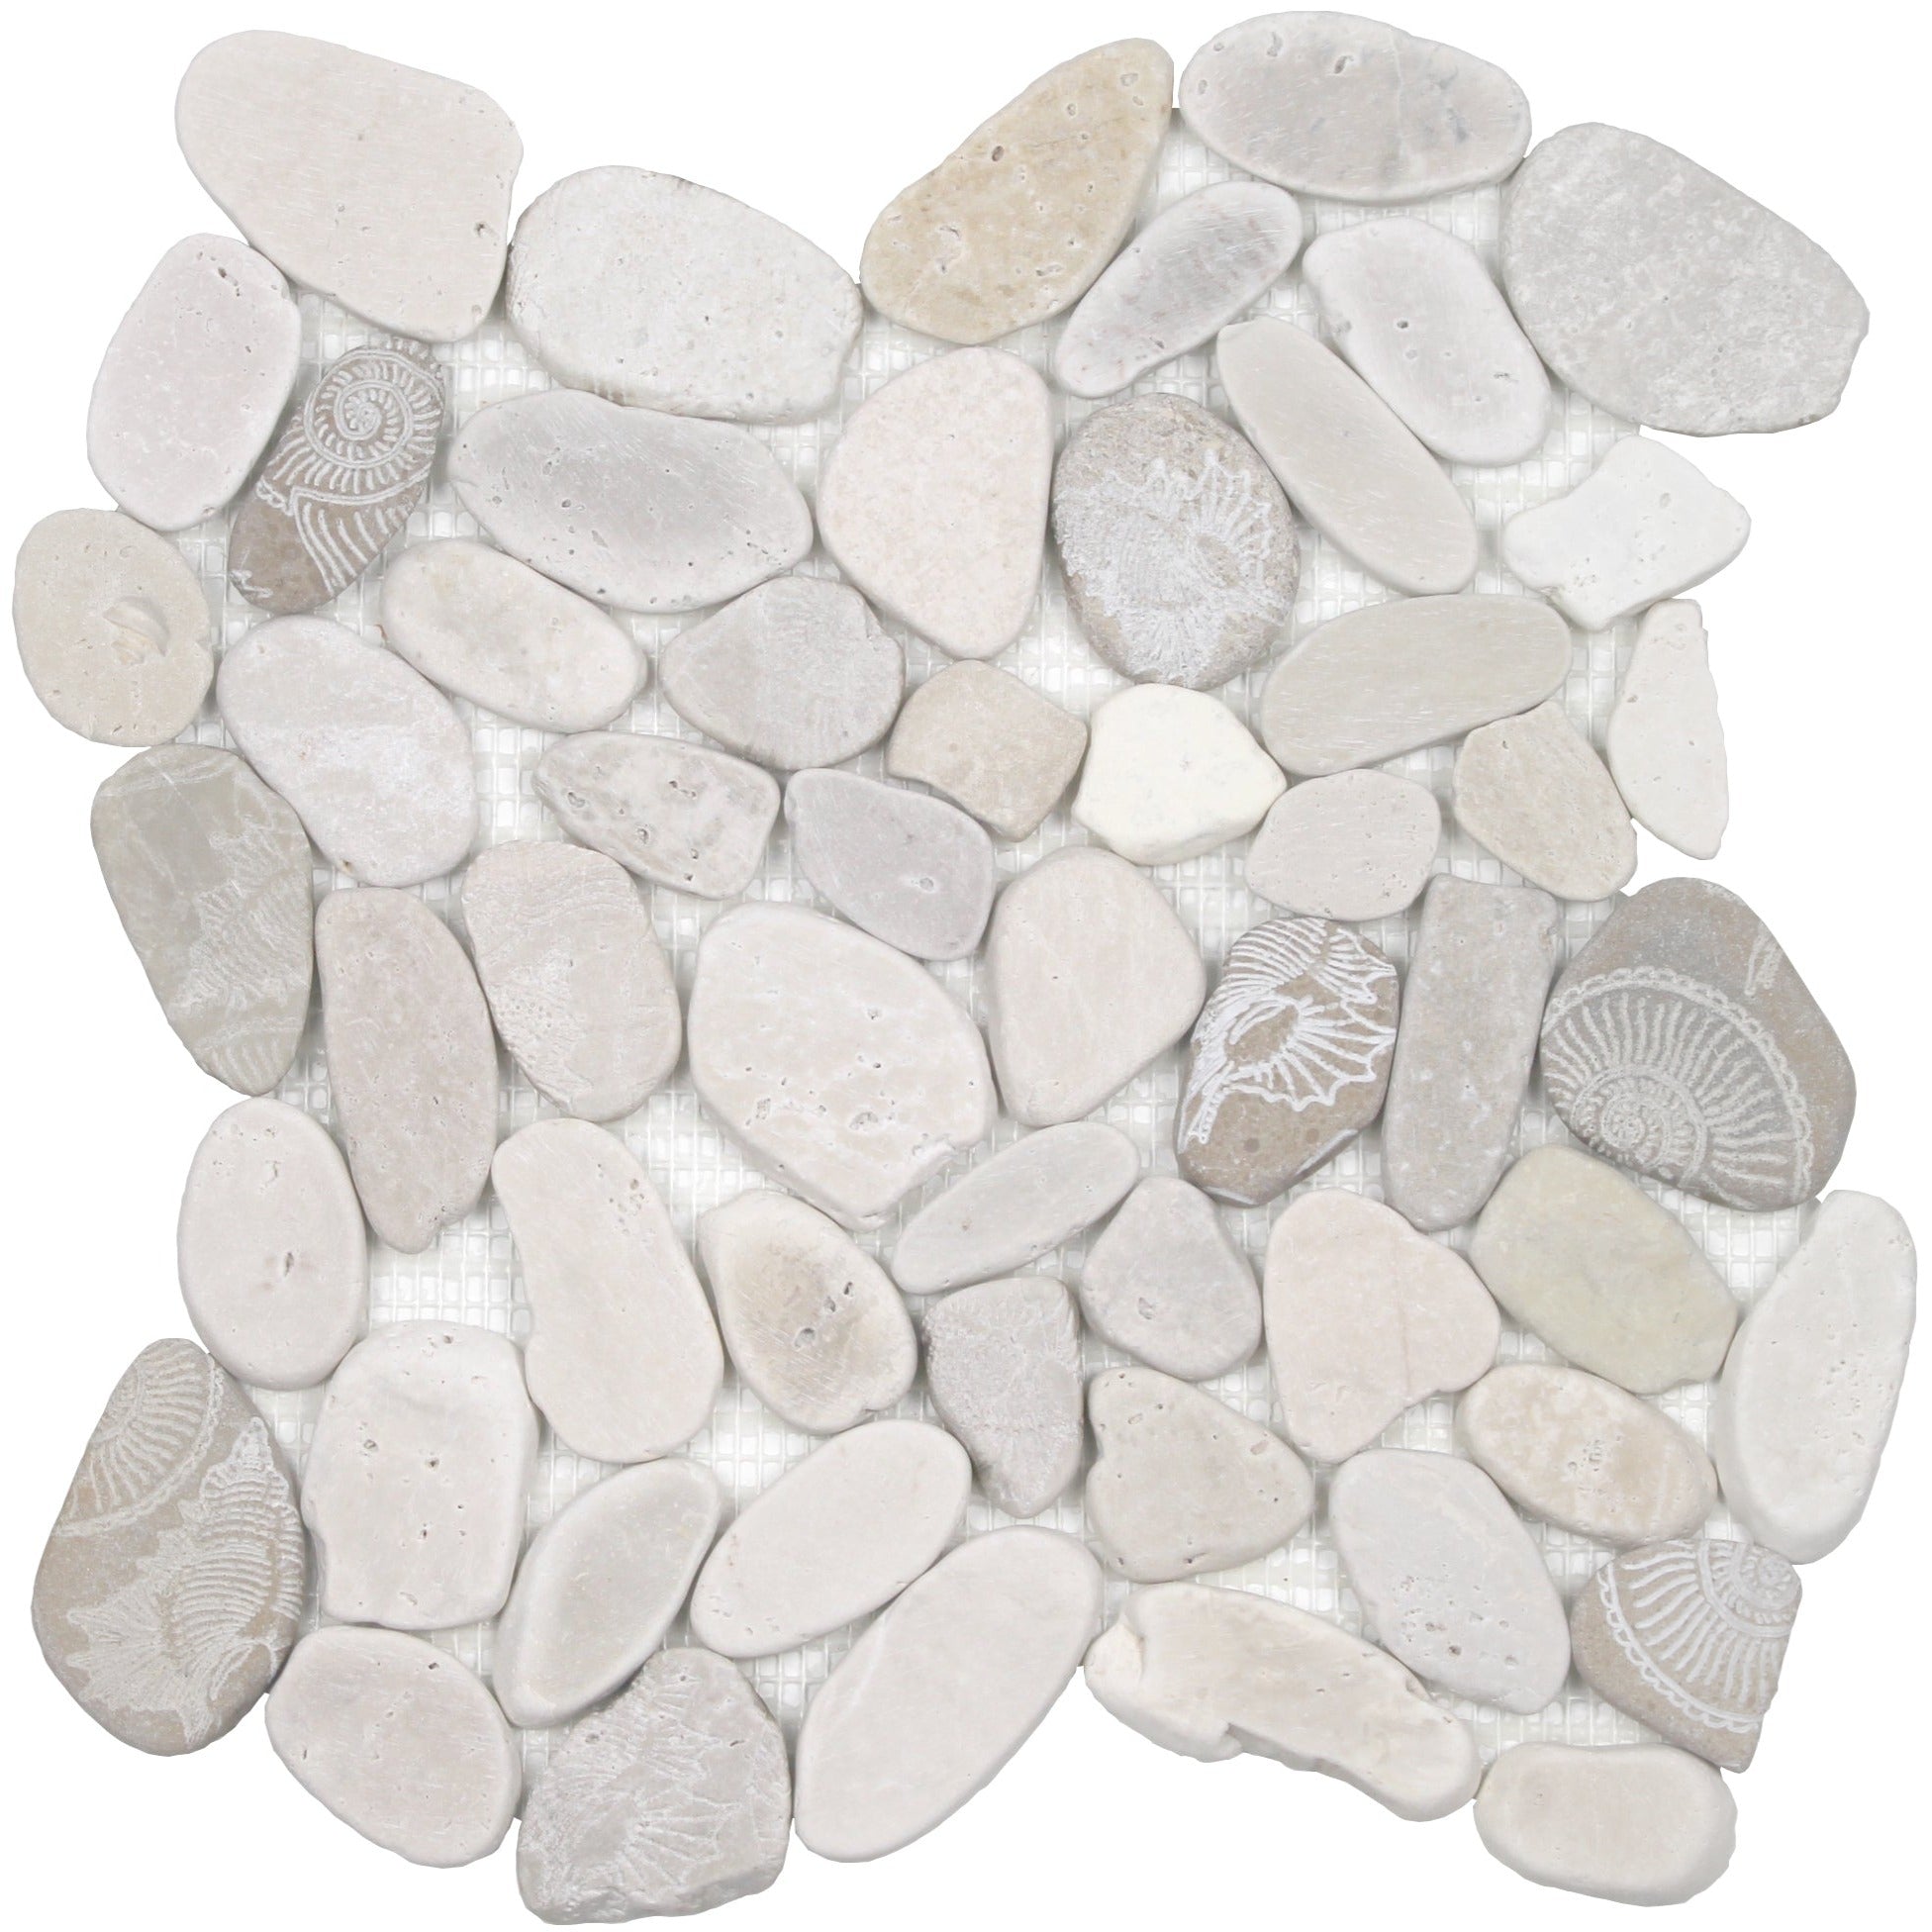 Tesoro - Ocean Stones Collection - Sliced Pebble Mosaic - Fossil Light Color